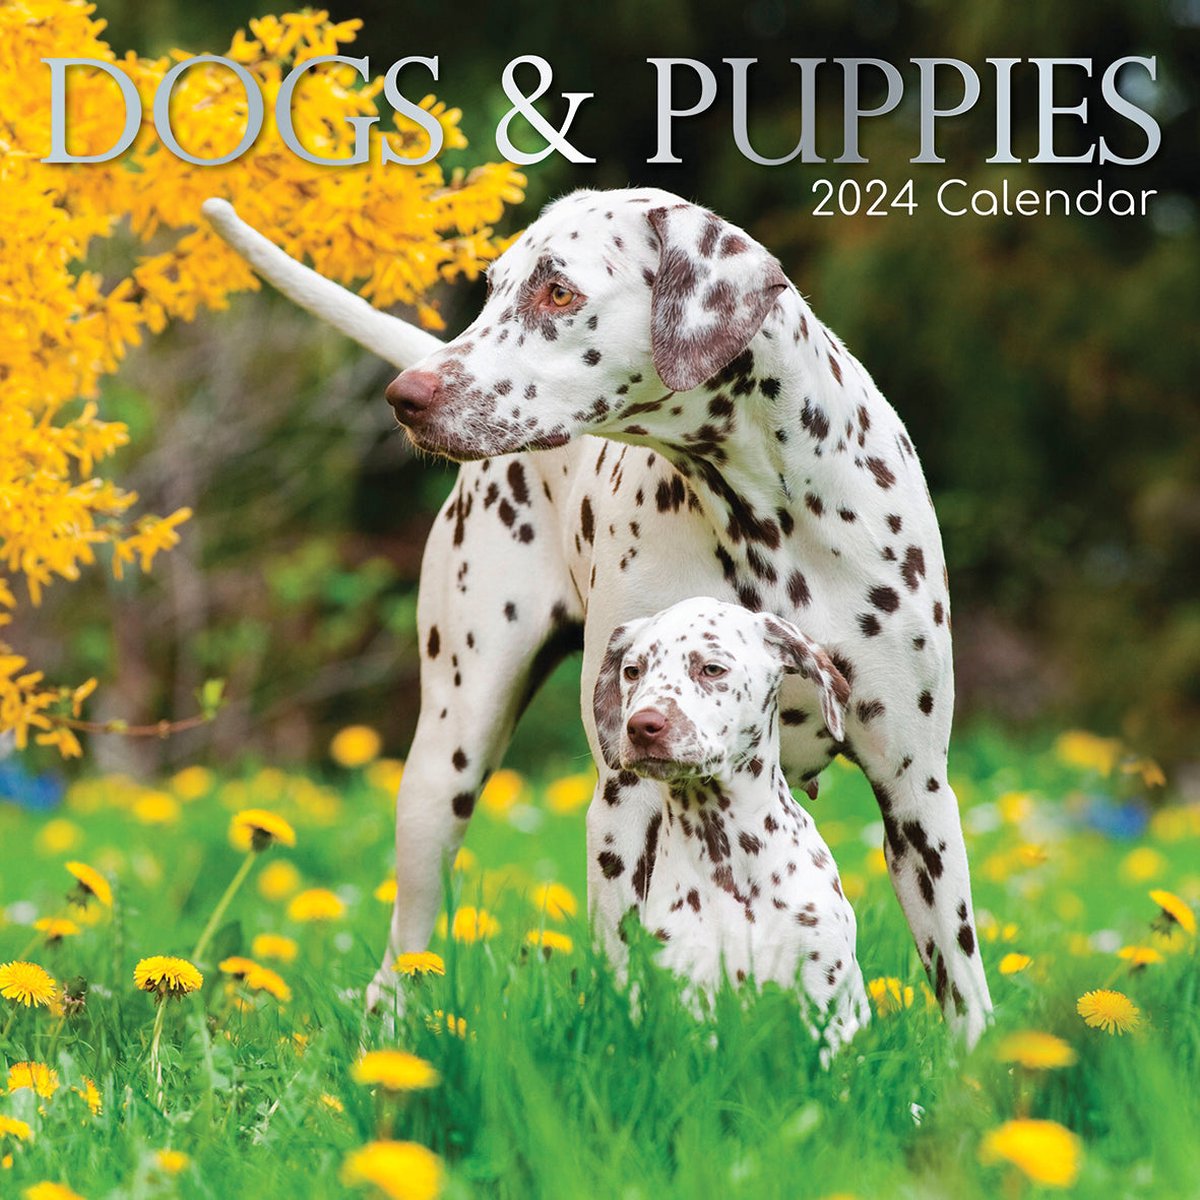 Dogs and Puppies Kalender 2024